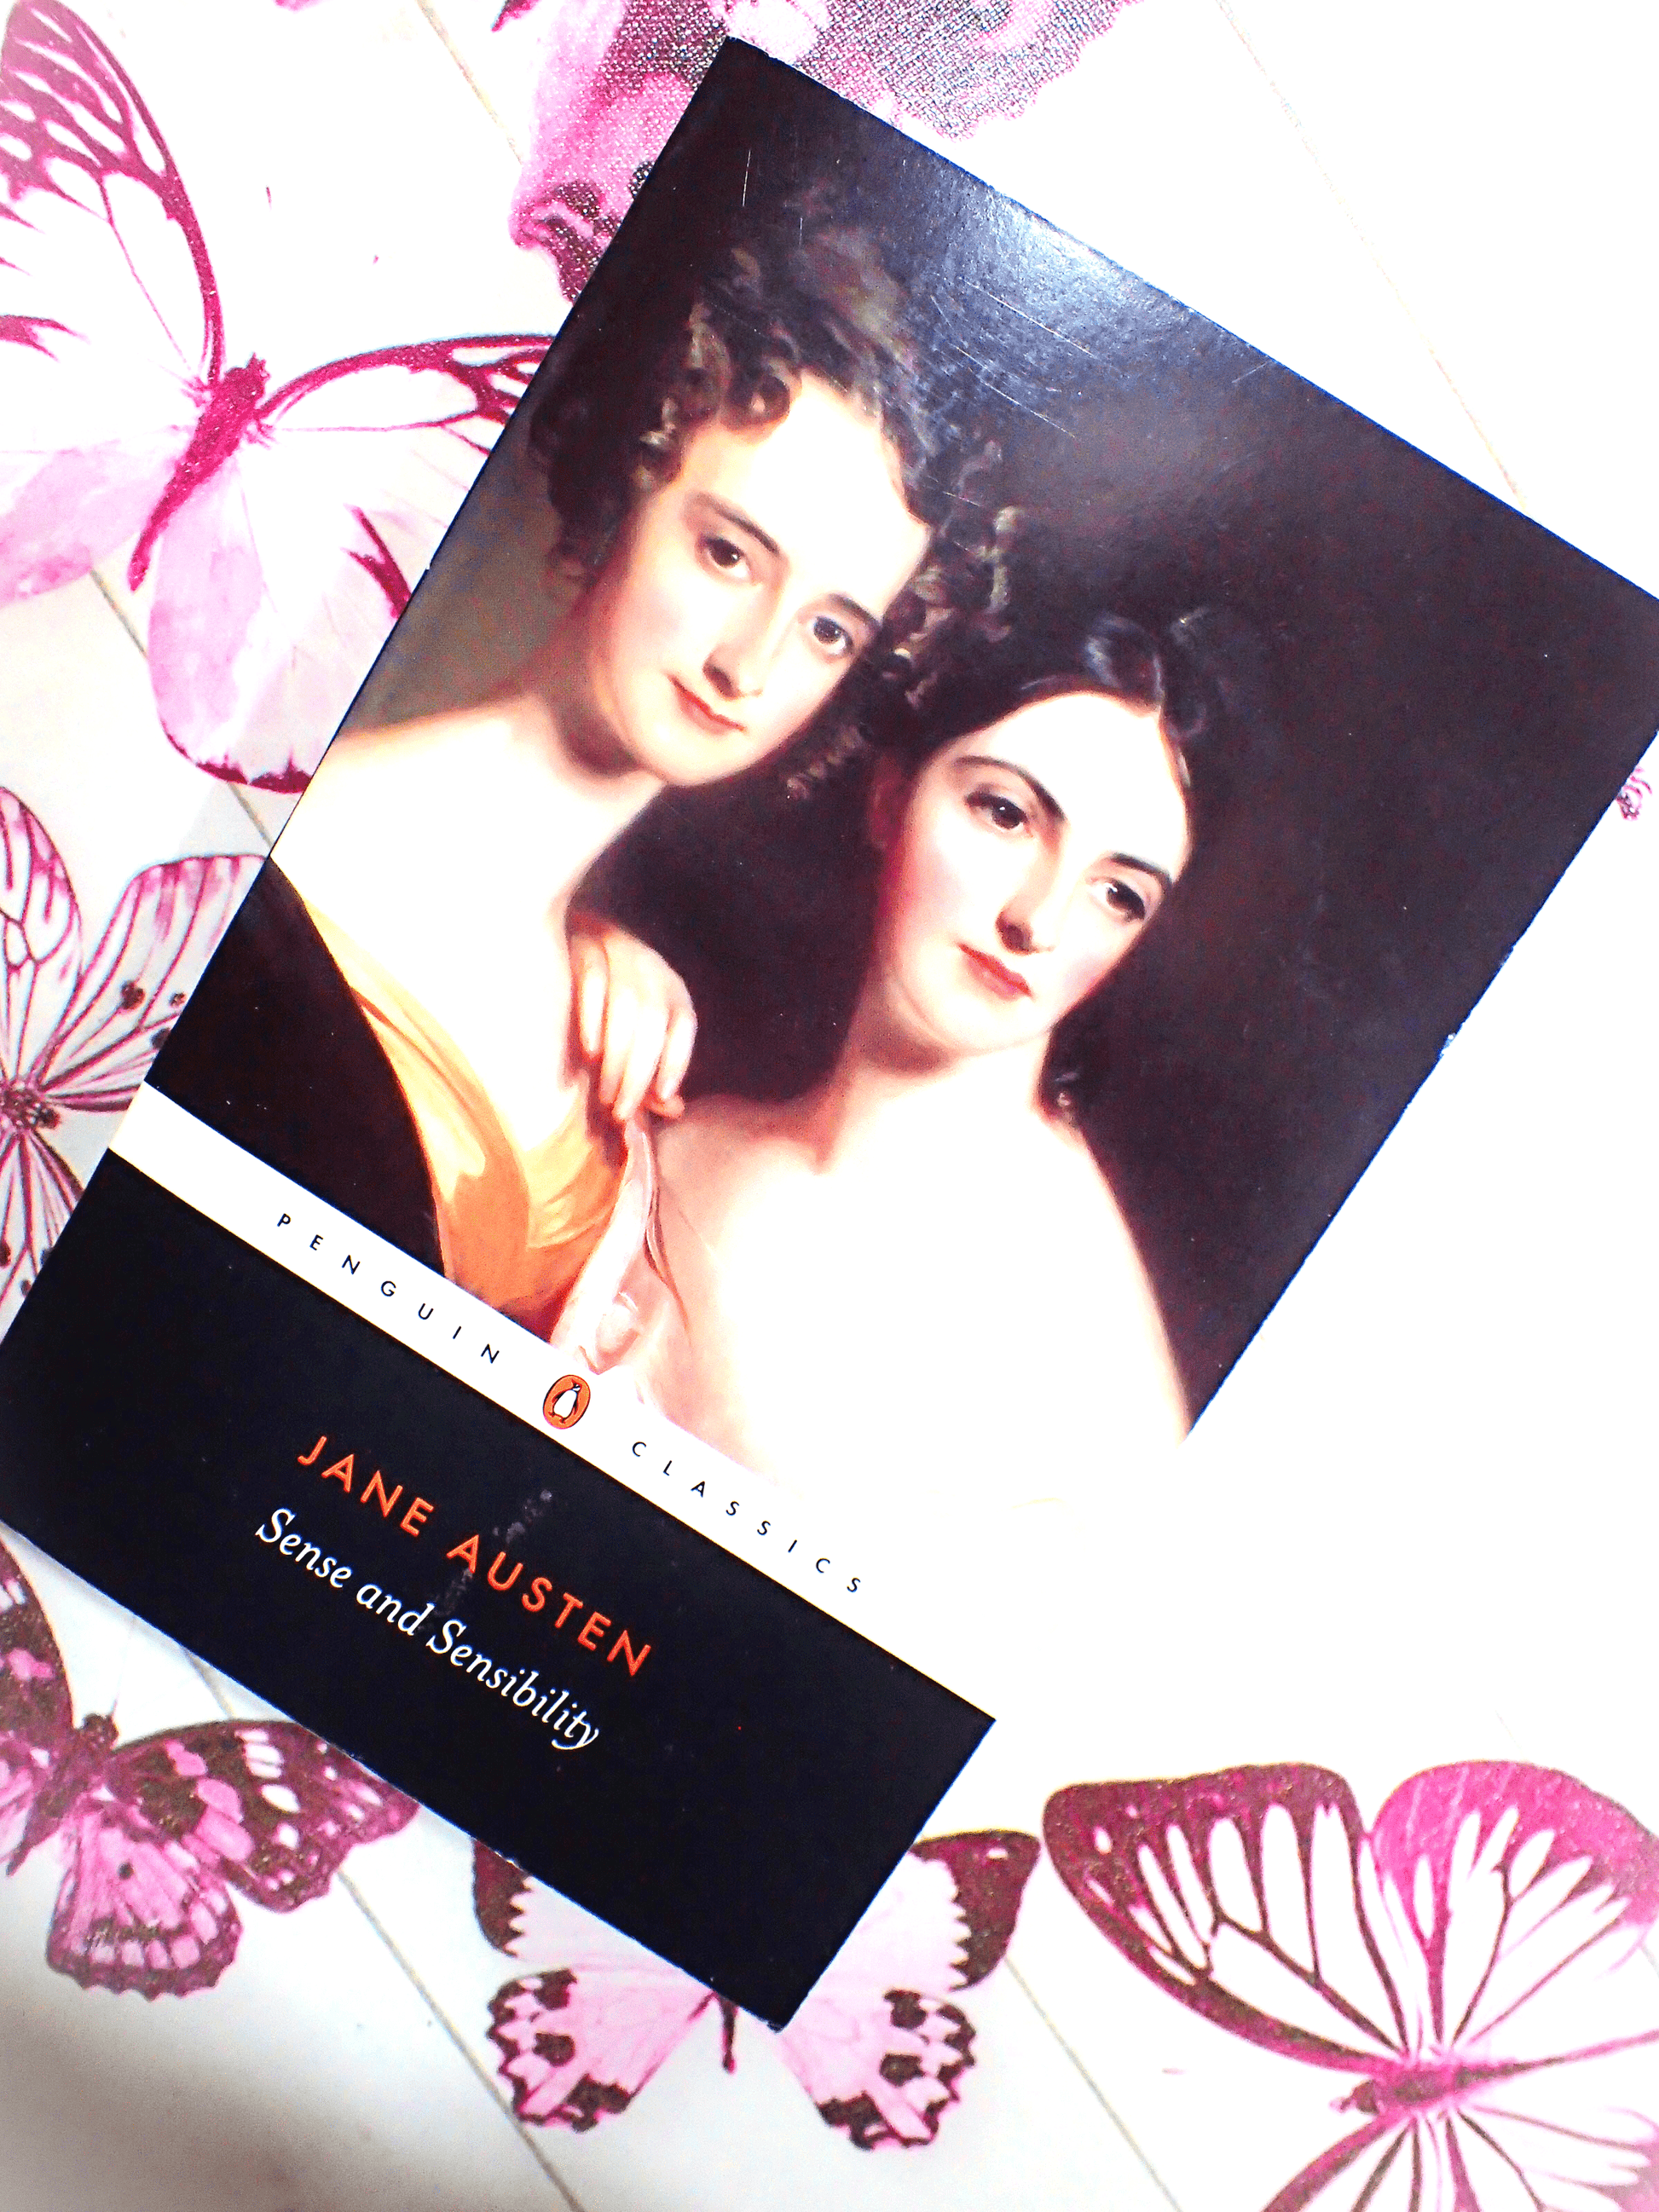 Front cover of paperback book Penguin Classics Sense and Sensibility Jane Austen showing portrait of two Regency ladies against a butterfly background. 